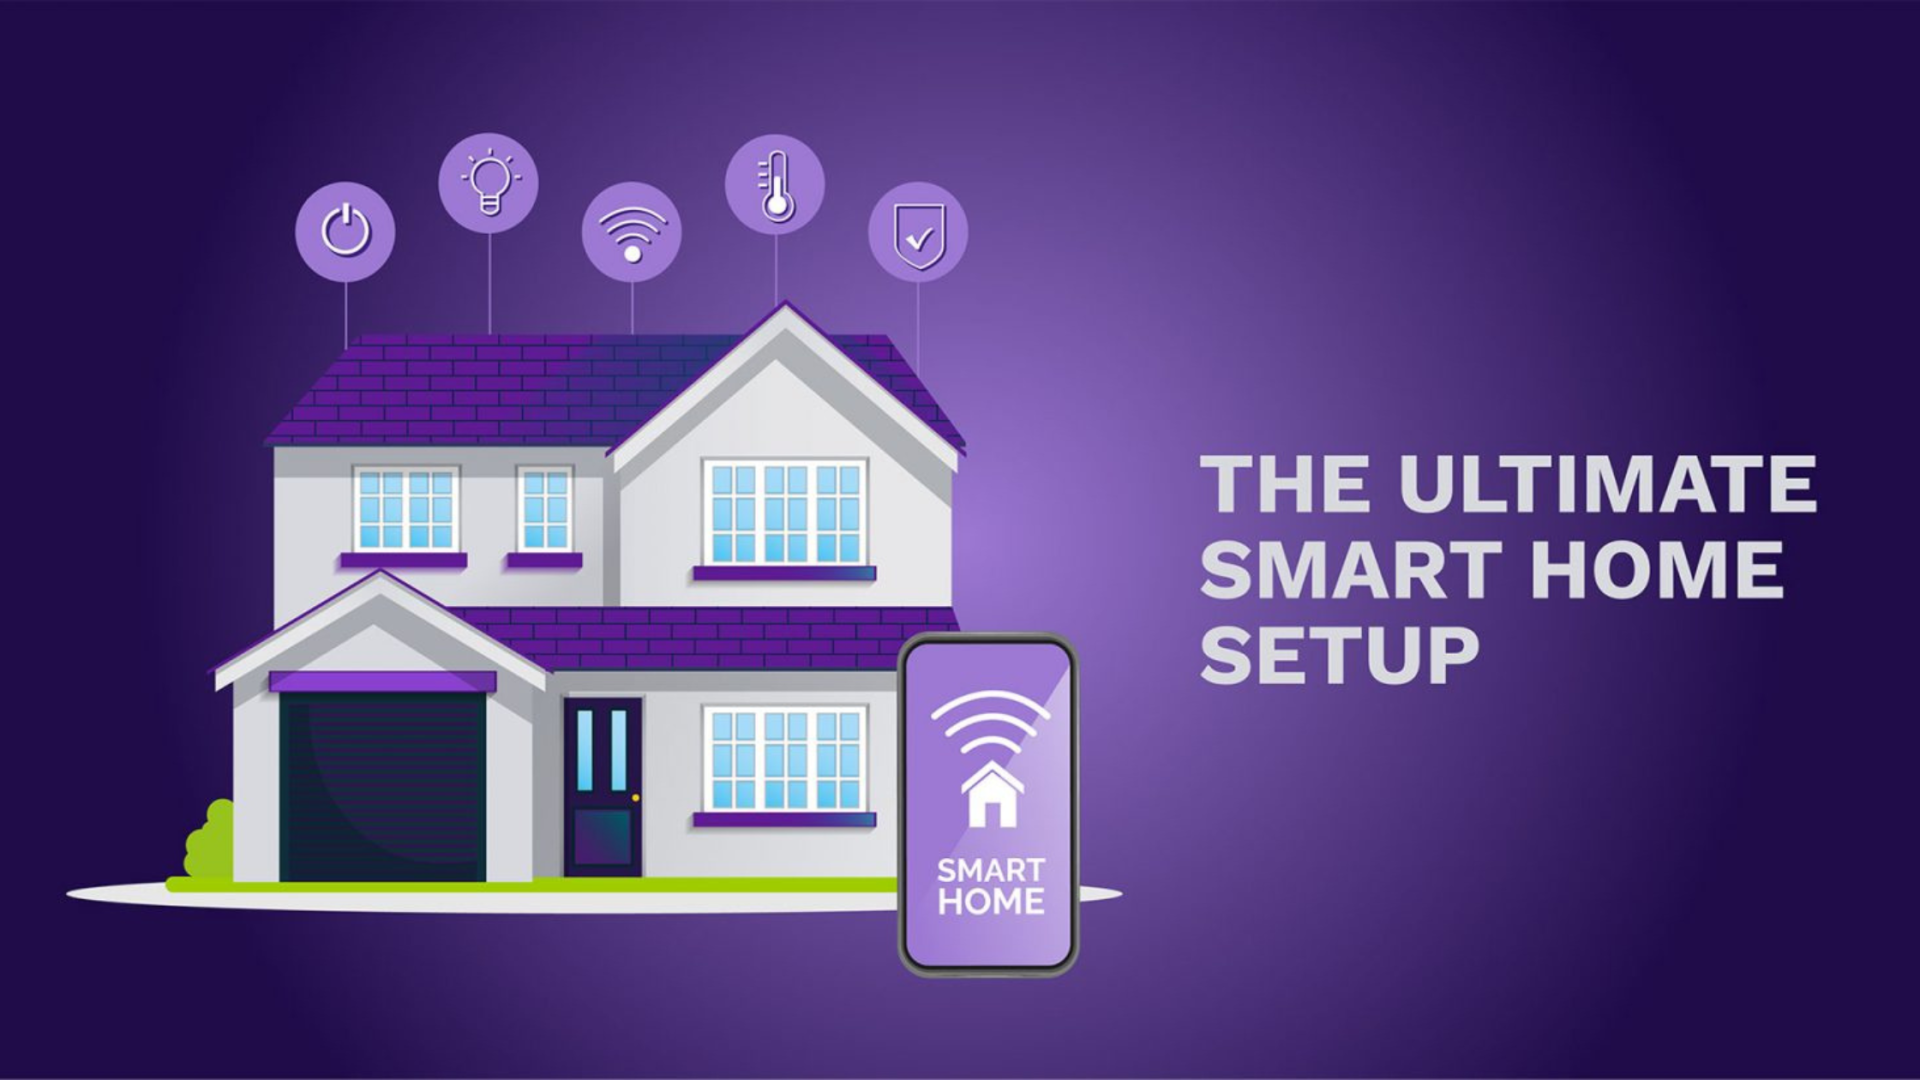 5 Smart Home Products for the Ultimate Home Setup